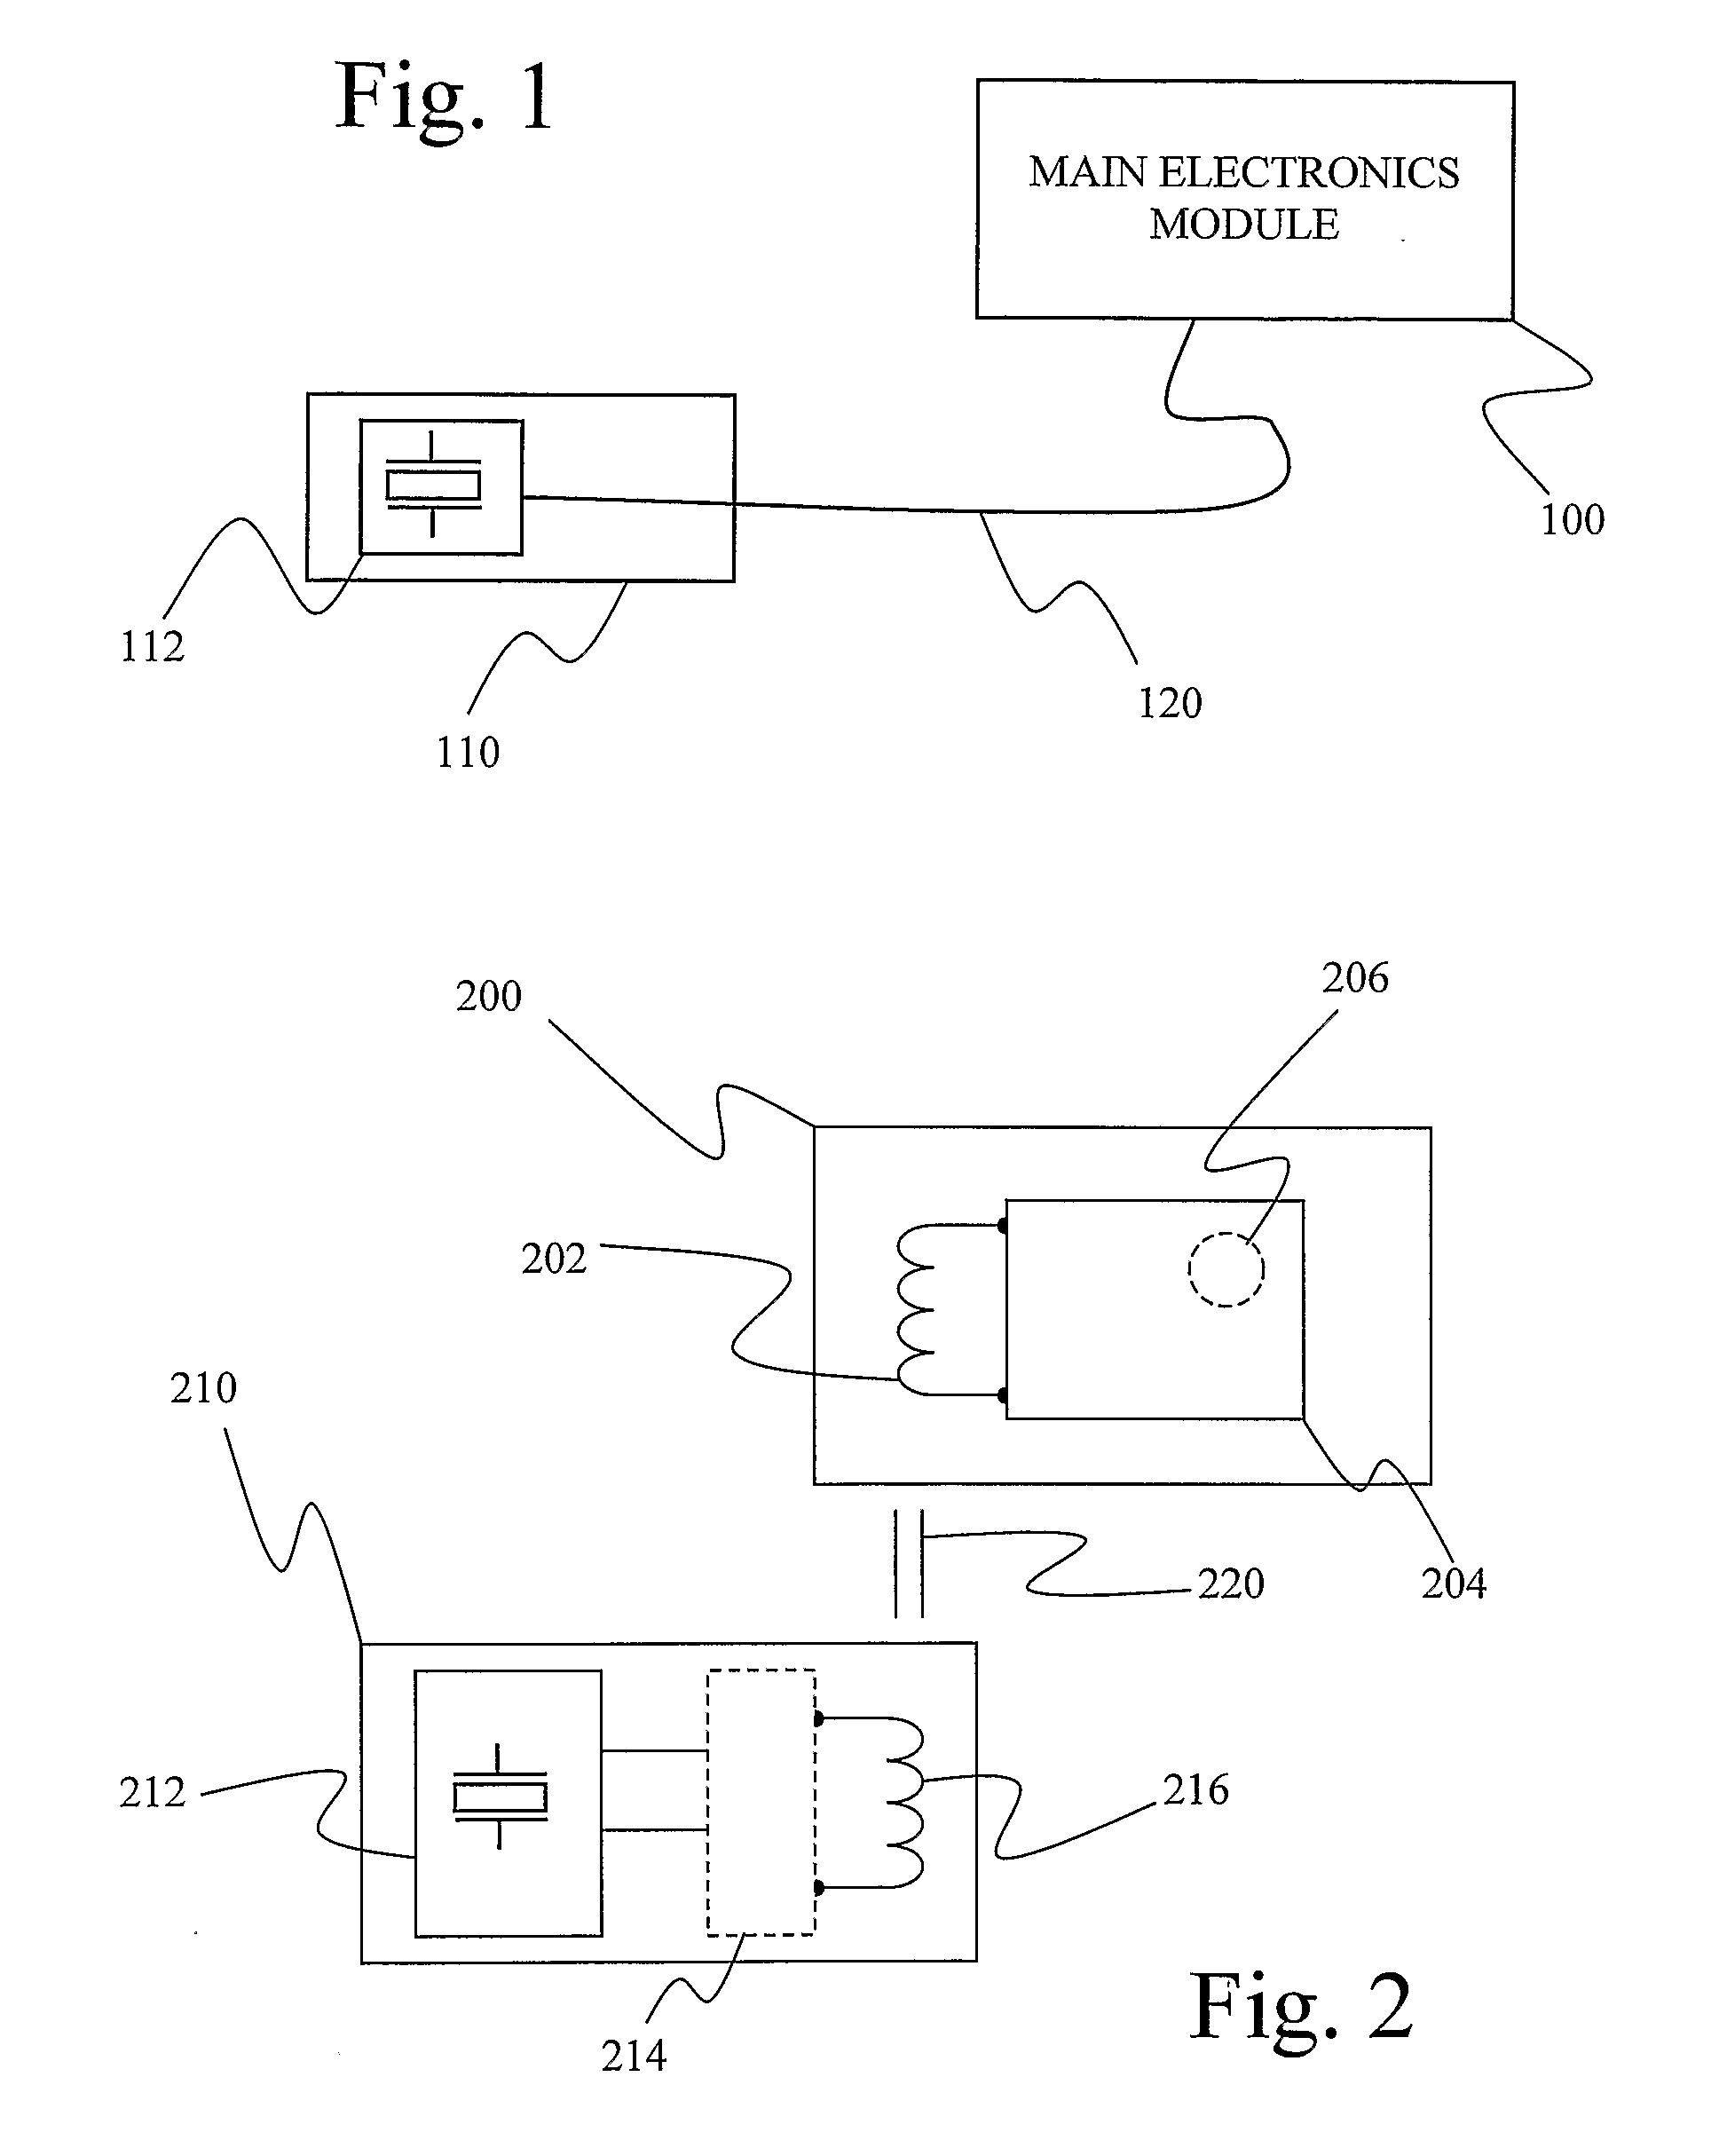 Inductive coupling of pulses from piezoelectric device